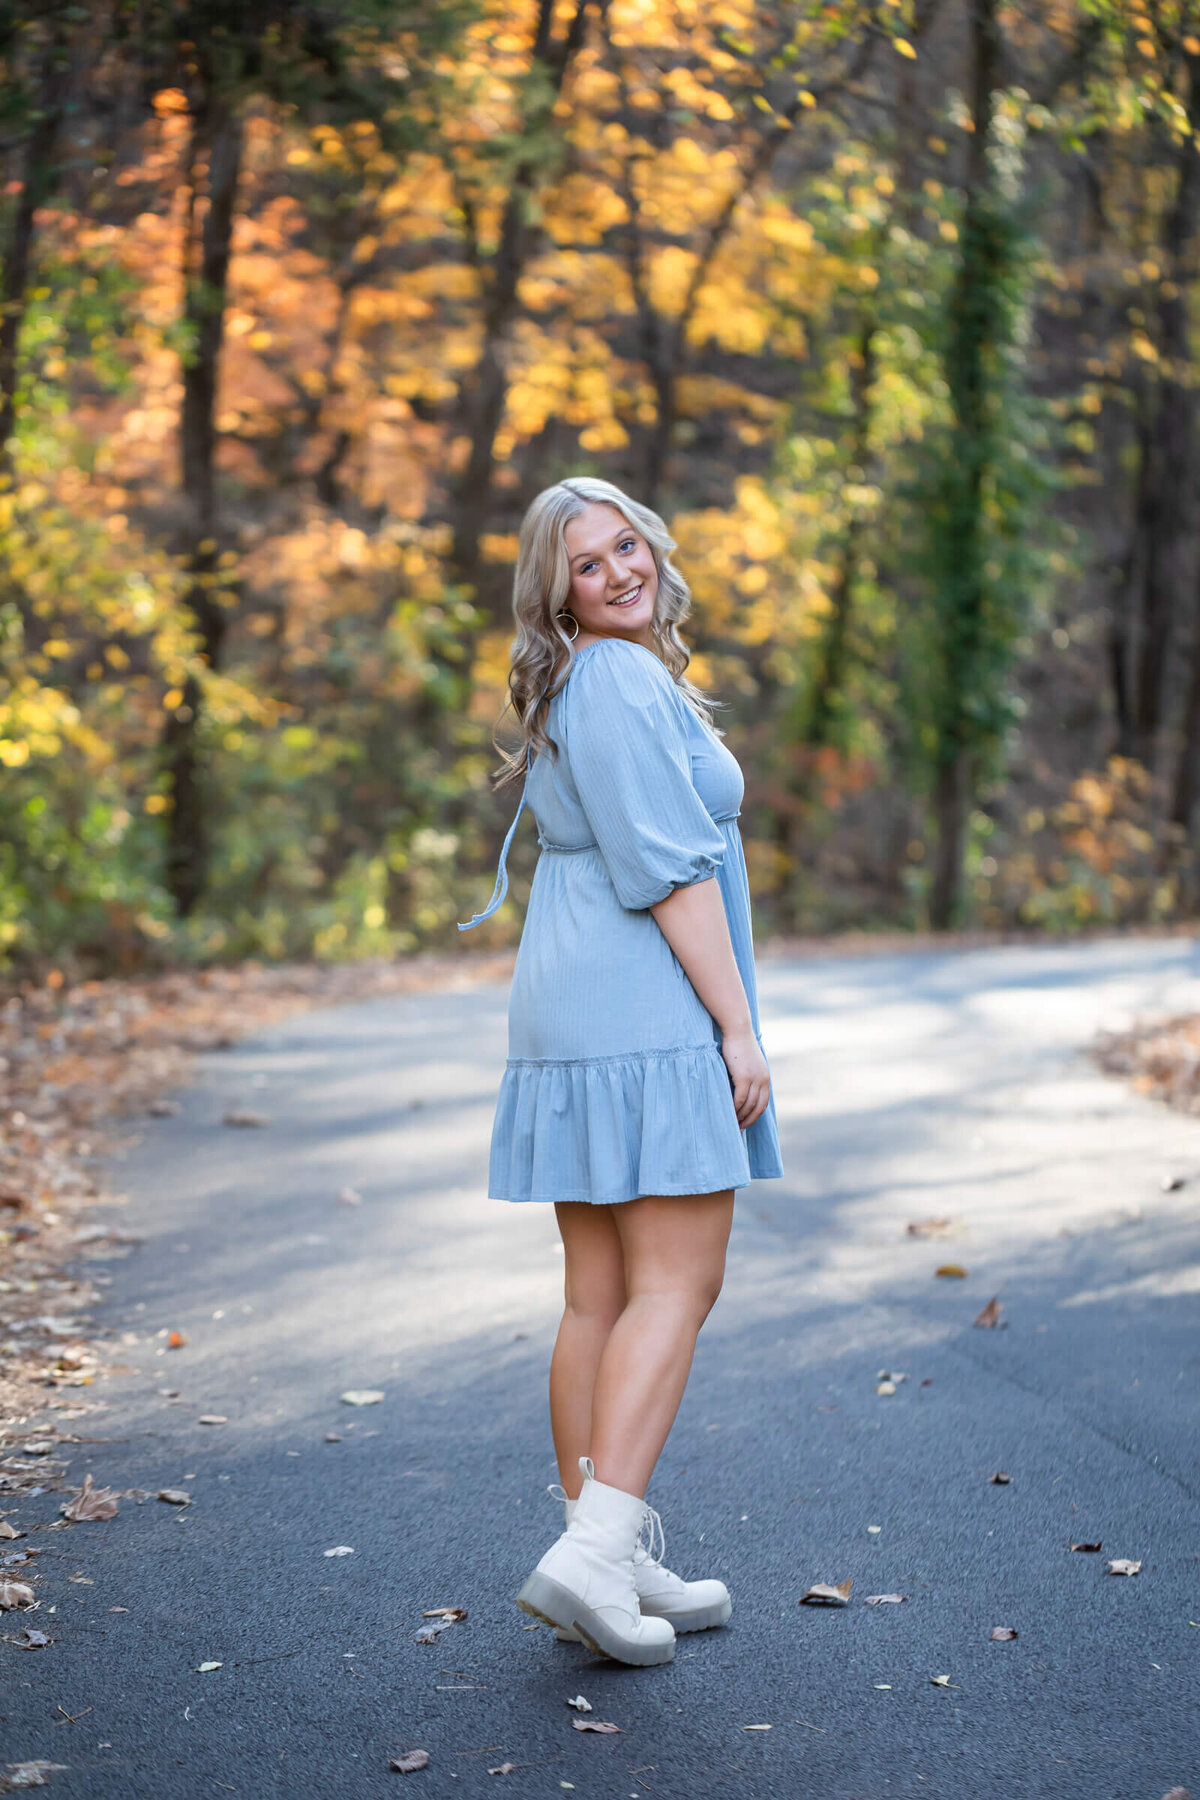 A pretty blonde haired teen girl in a baby blue dress spins on a country road surrounded by colorful fall leaves. Photograph by Dynae Levingston.